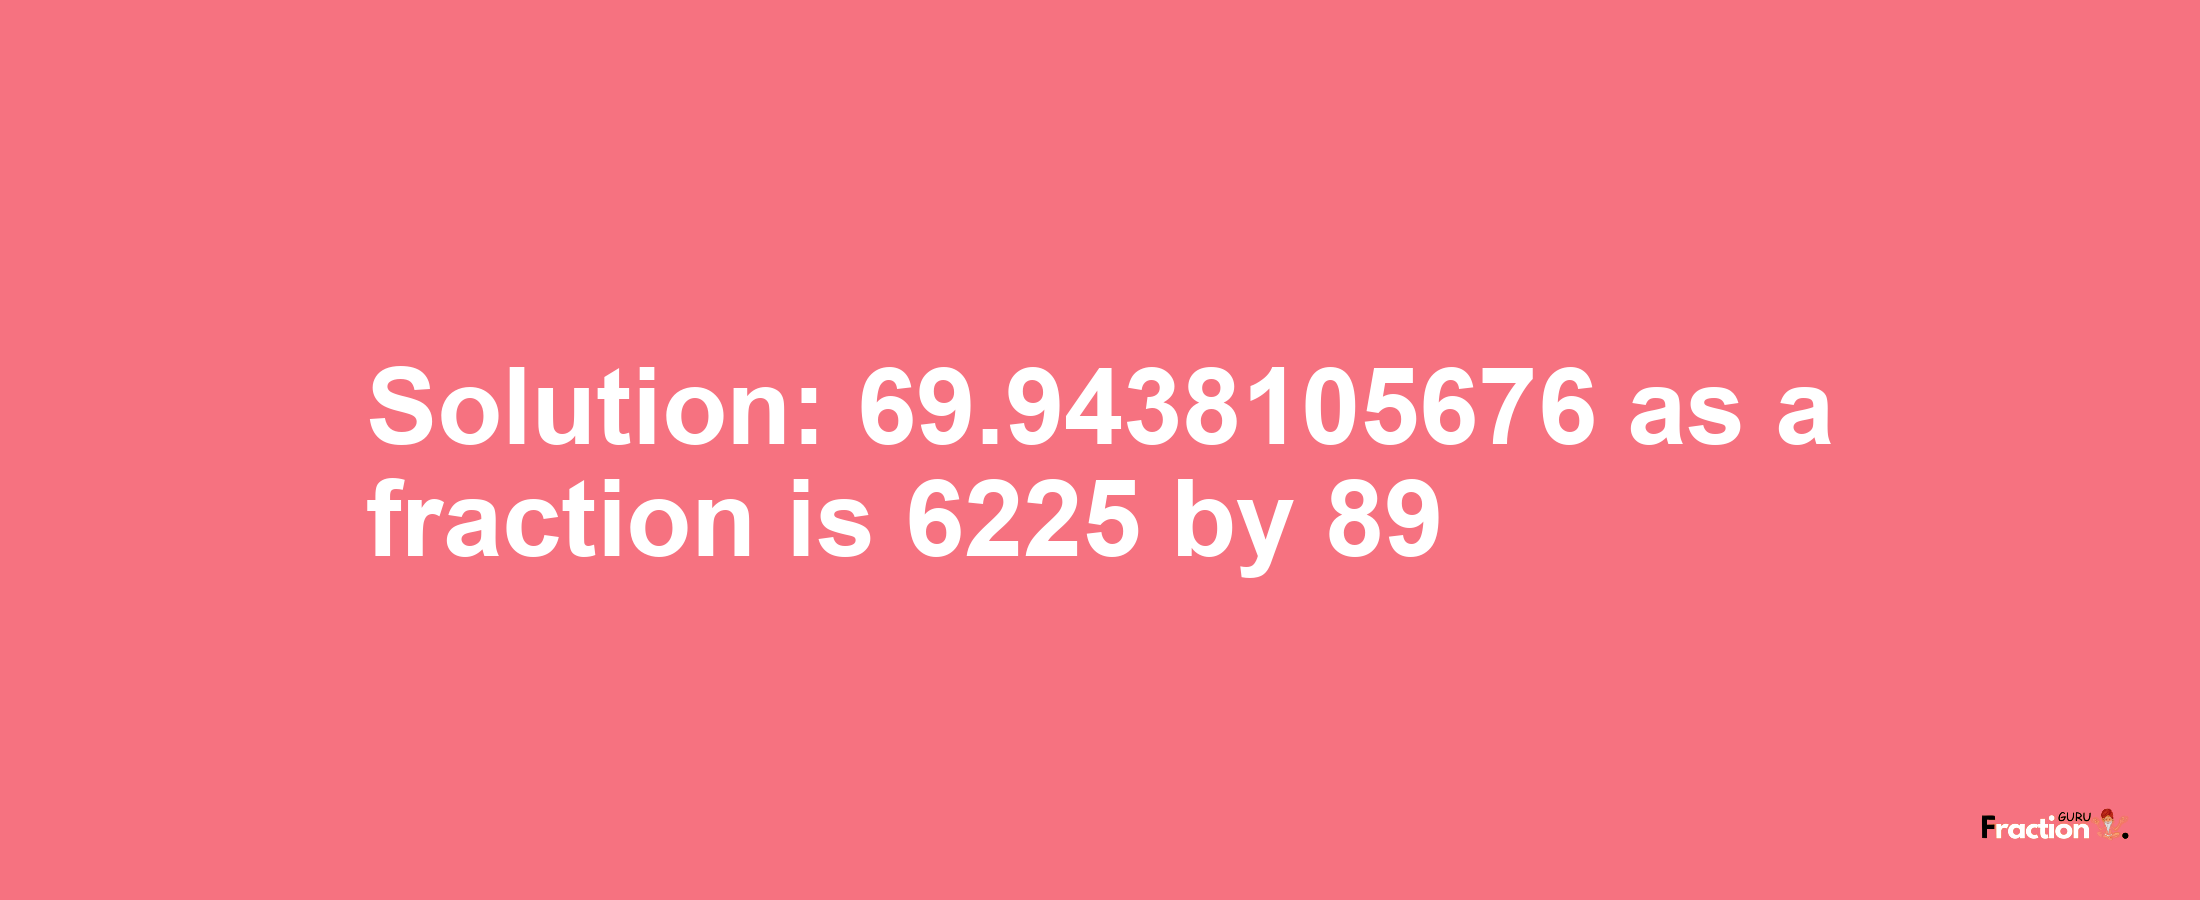 Solution:69.9438105676 as a fraction is 6225/89